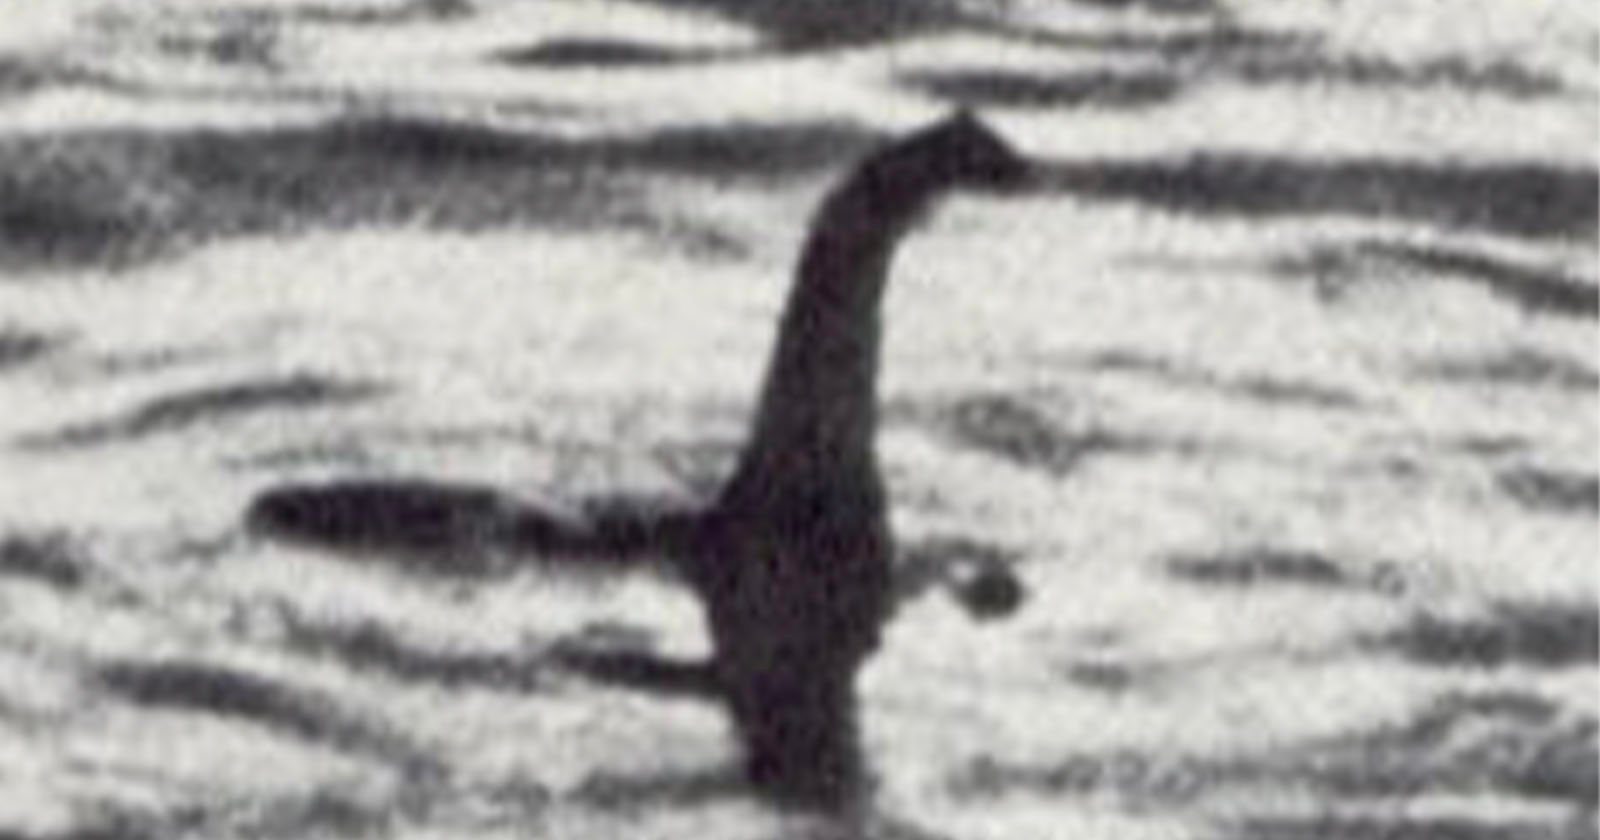 NASA Urged to Offer Its Advanced Imaging System in Search for Loch Ness Monster